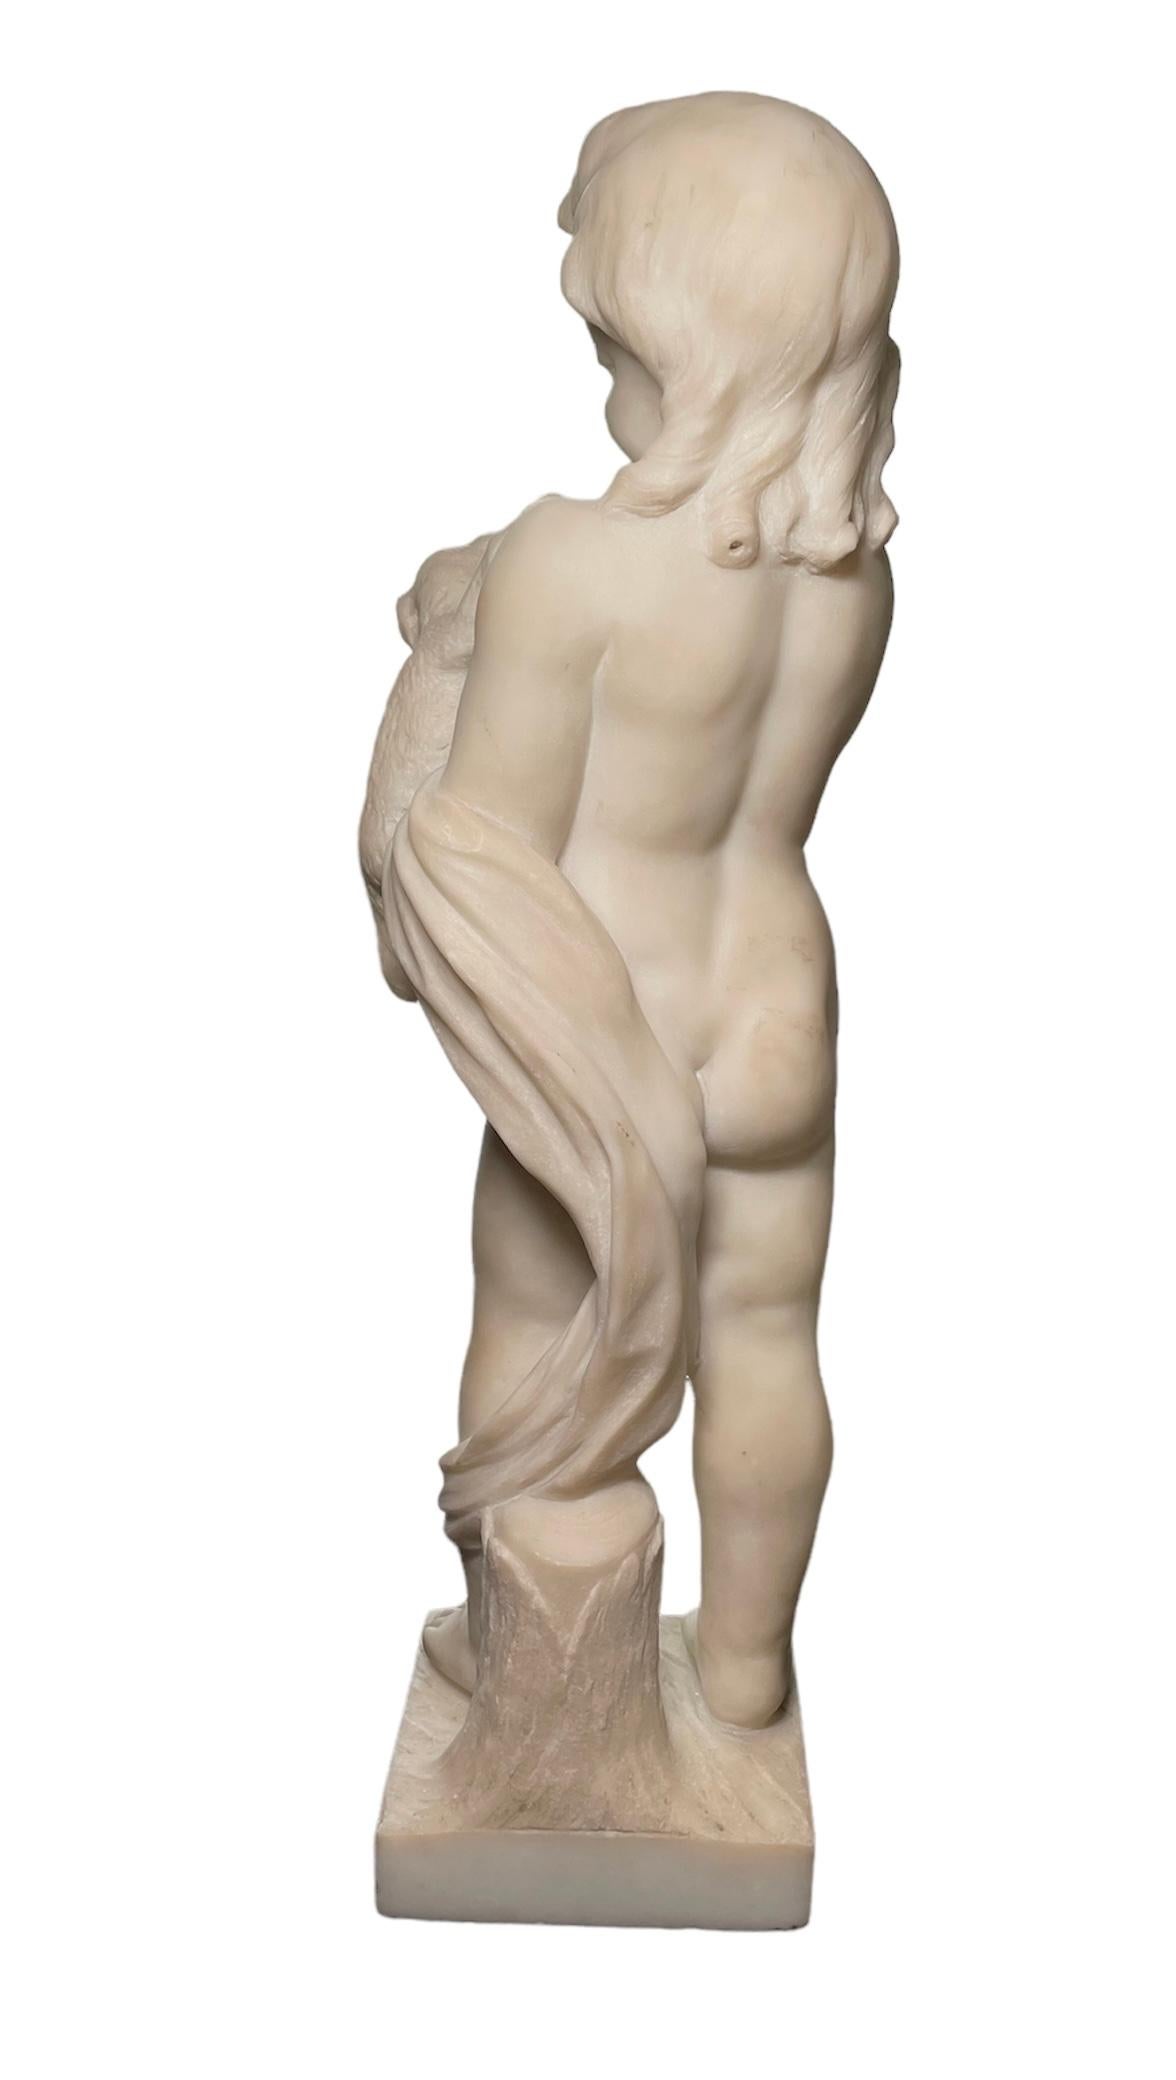 This is a marble sculpture of a cherub who is standing up in front of a trunk. His head has an abundant hair with curly ends. He is gently holding a puppy. The sculpture has attached a square alabaster base.